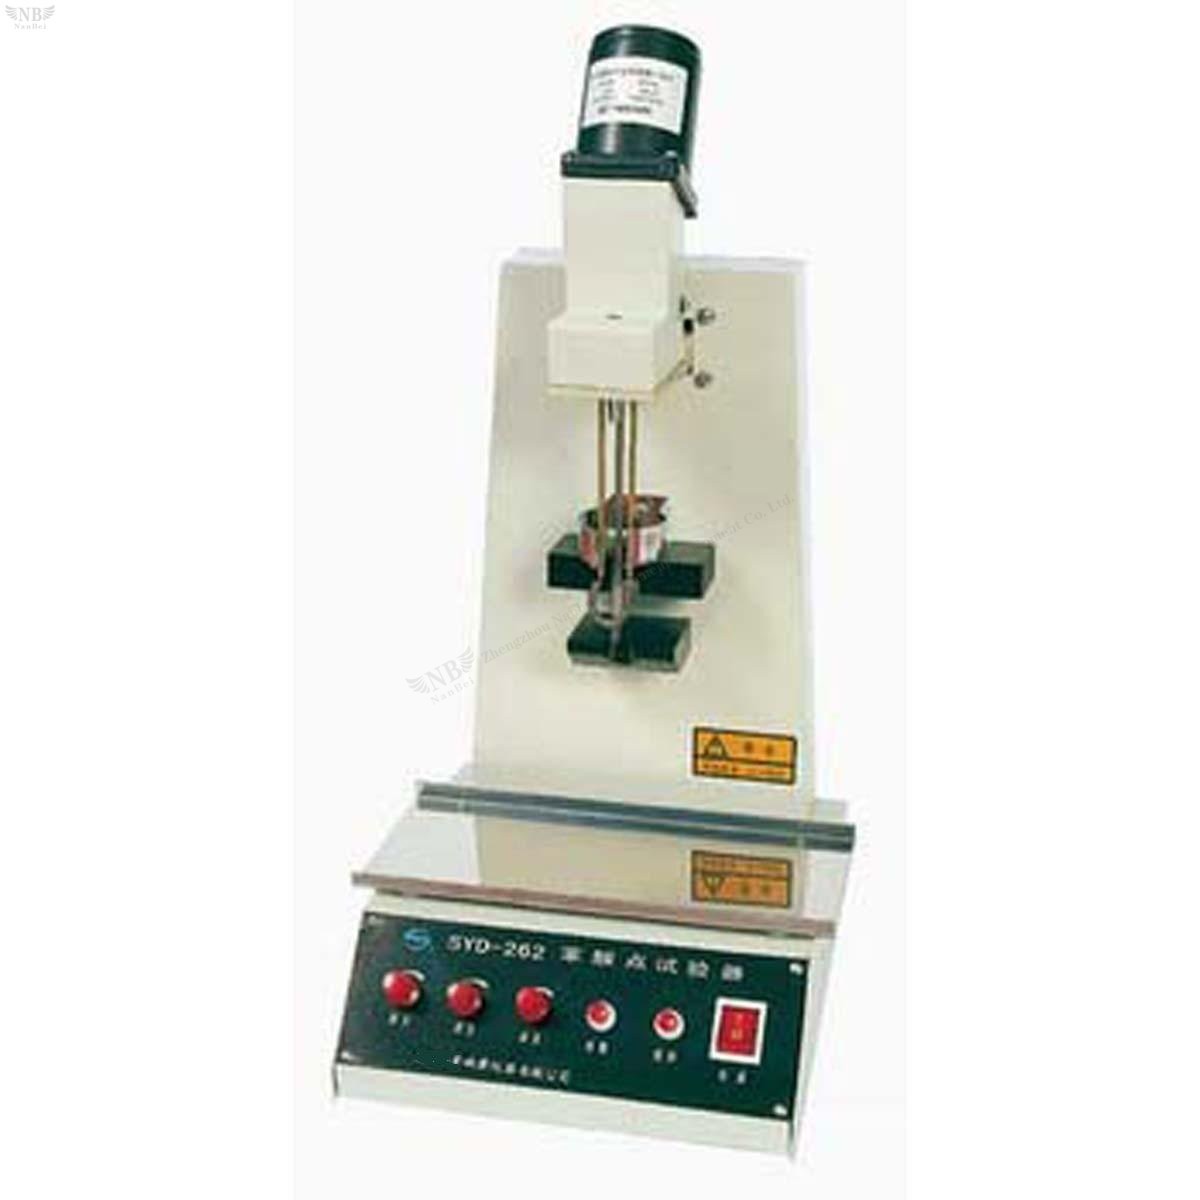 SYD-262 Aniline Point Tester